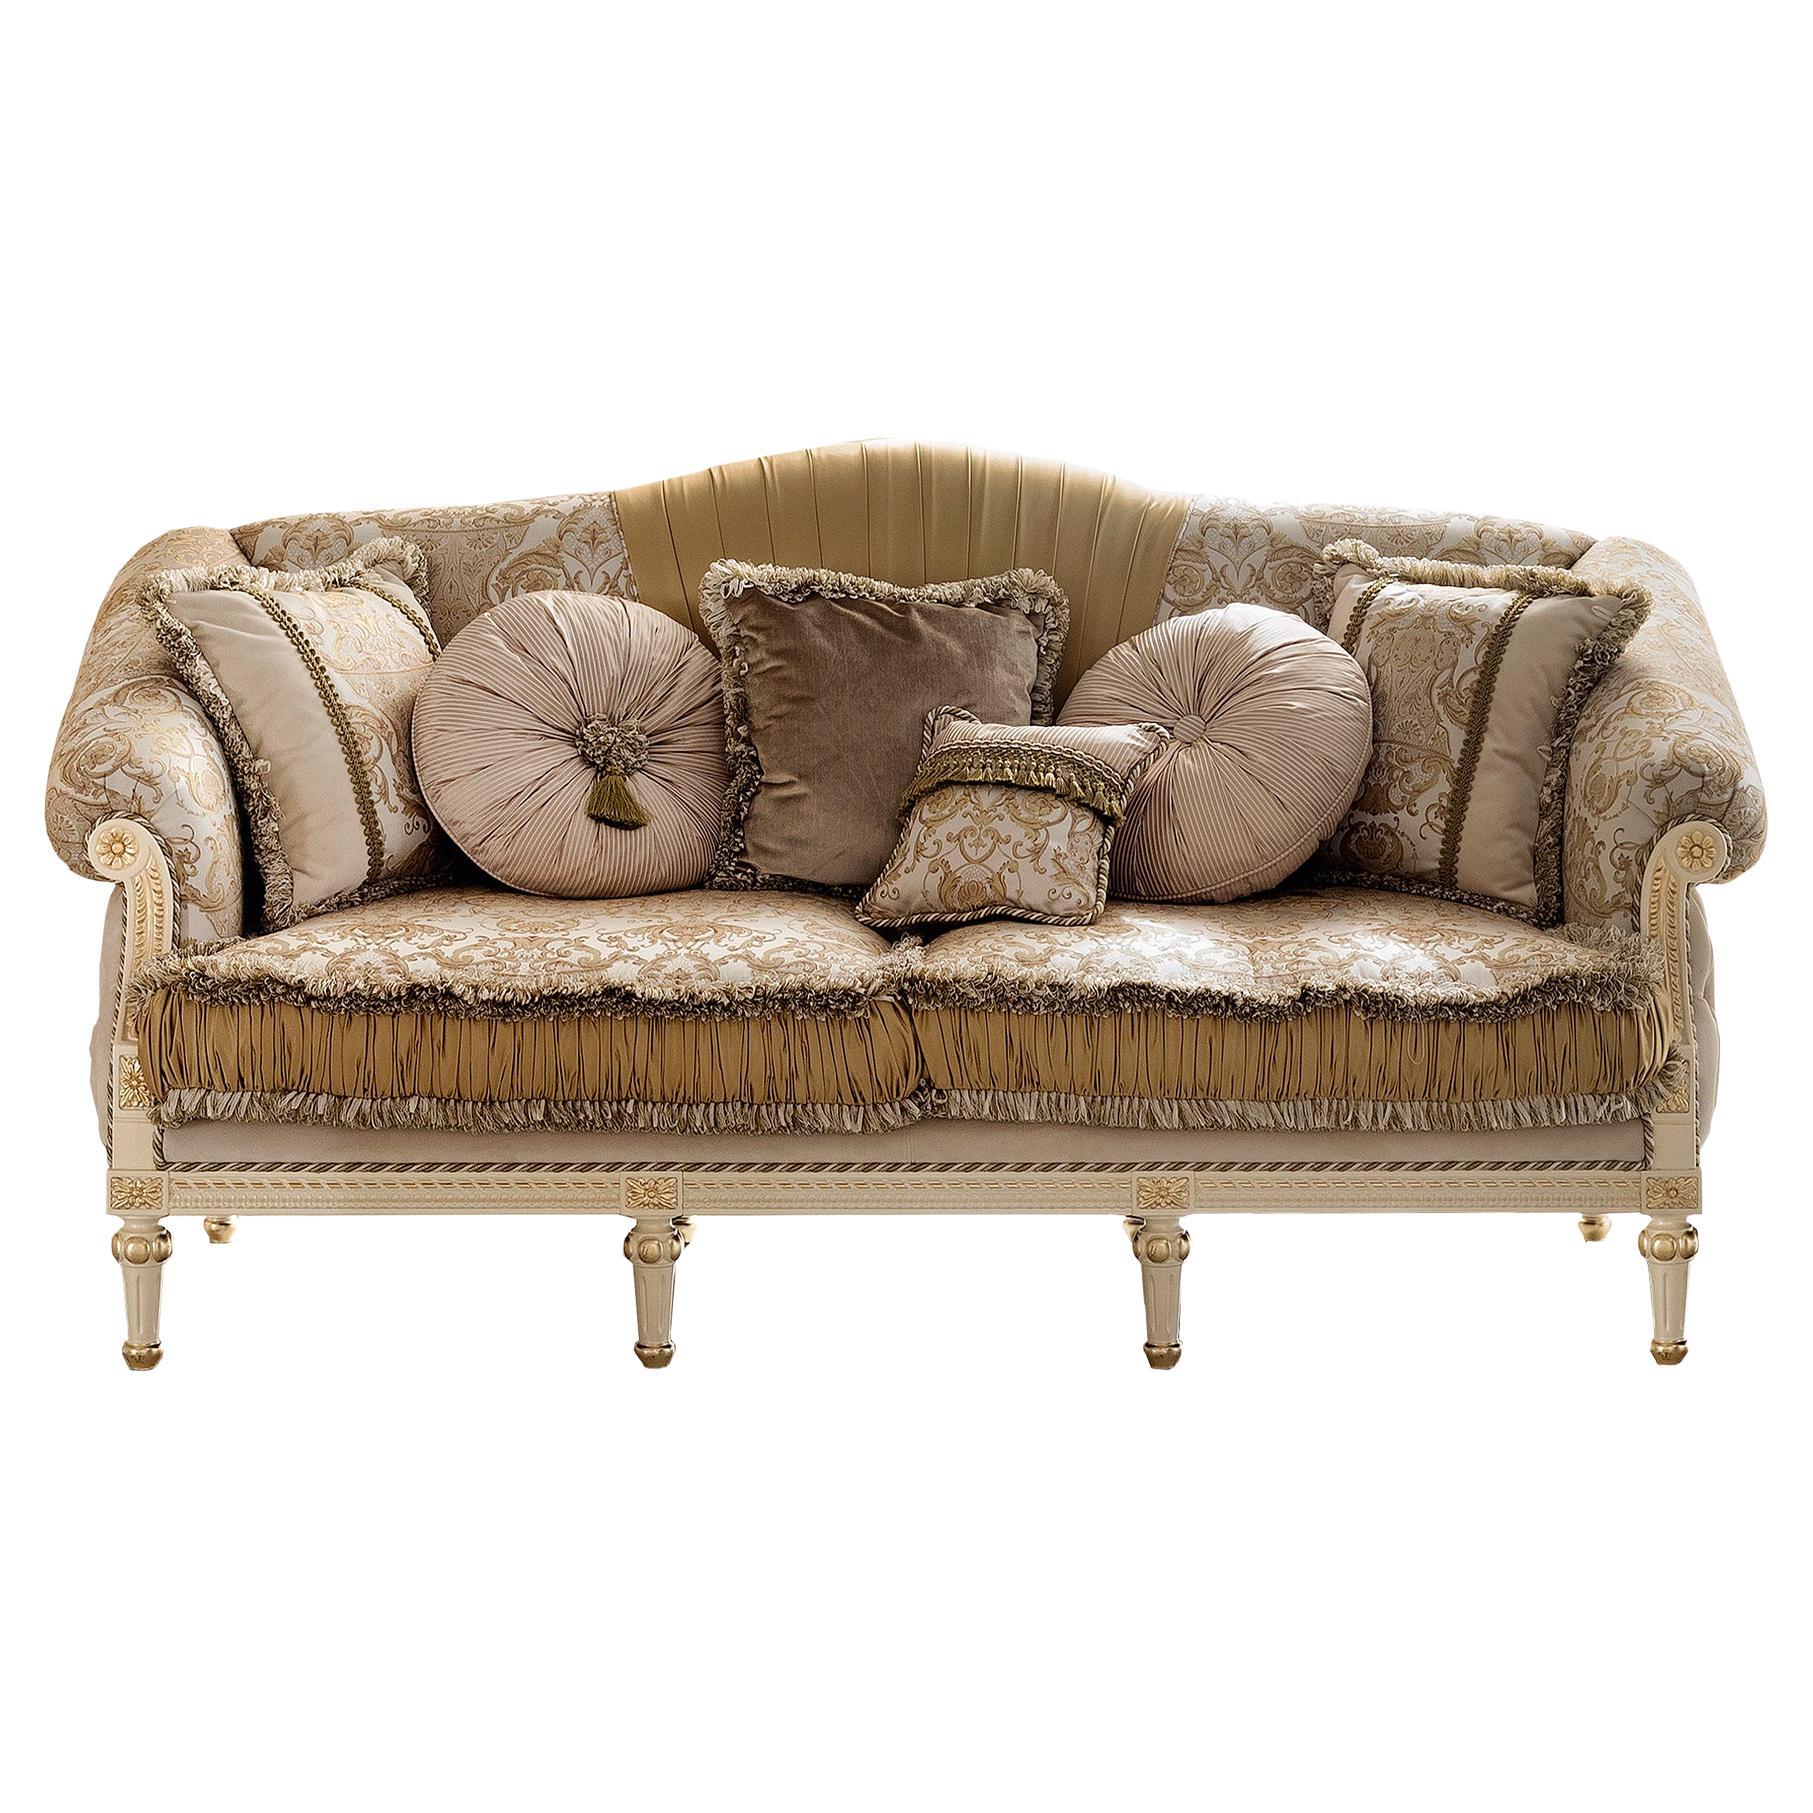 Golden Satin Duchess Sofa in Ivory Laquered Wood and Velvety Cream Capitonné For Sale